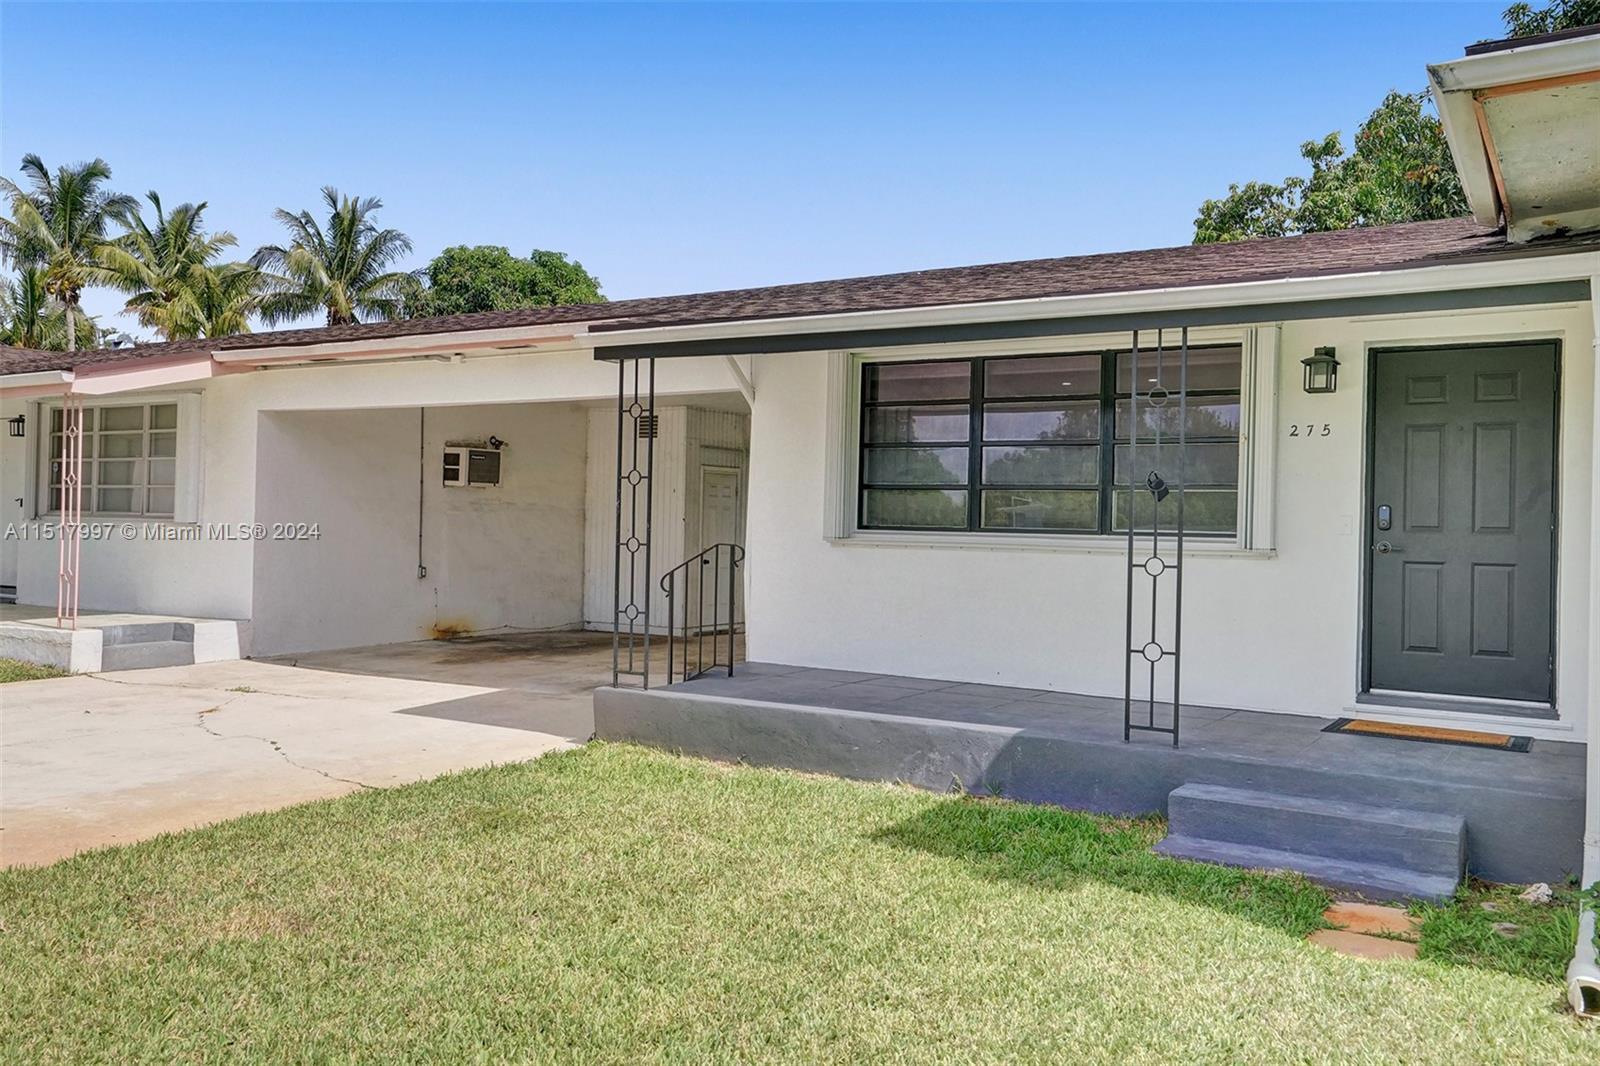 265 150th St, Miami, Multi Family Home,  for sale, Dale Largie, CPA, SFR, LIFESTYLE INTERNATIONAL REALTY